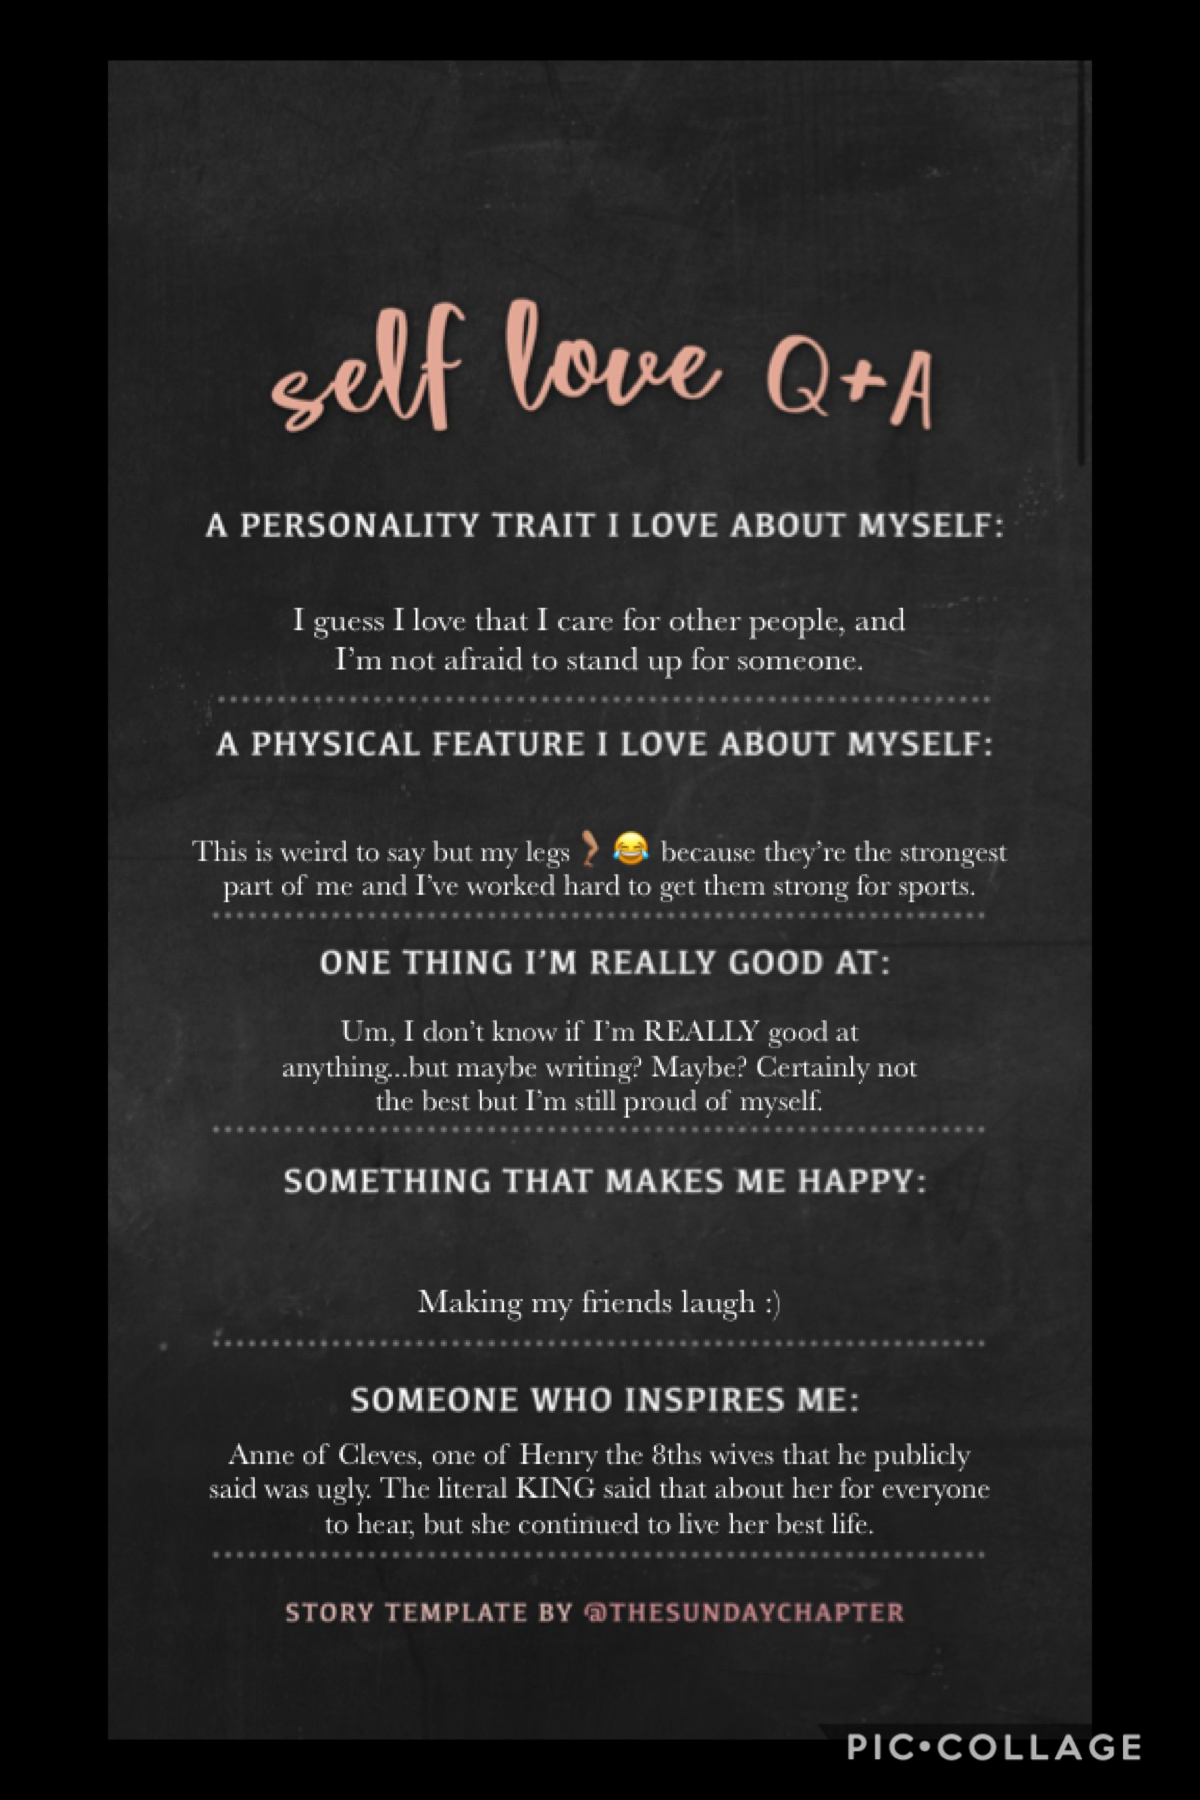 y’all should go fill this out cuz ik u need some self love homie ok GO FILL THIS OUT U AMAZING HUMAN BEAN AND I LOVE YOU AND DONT EVER FORGET IT

i needed this too ngl and i was crying yesterday filling this out soooo FUN ok go fill it out😂